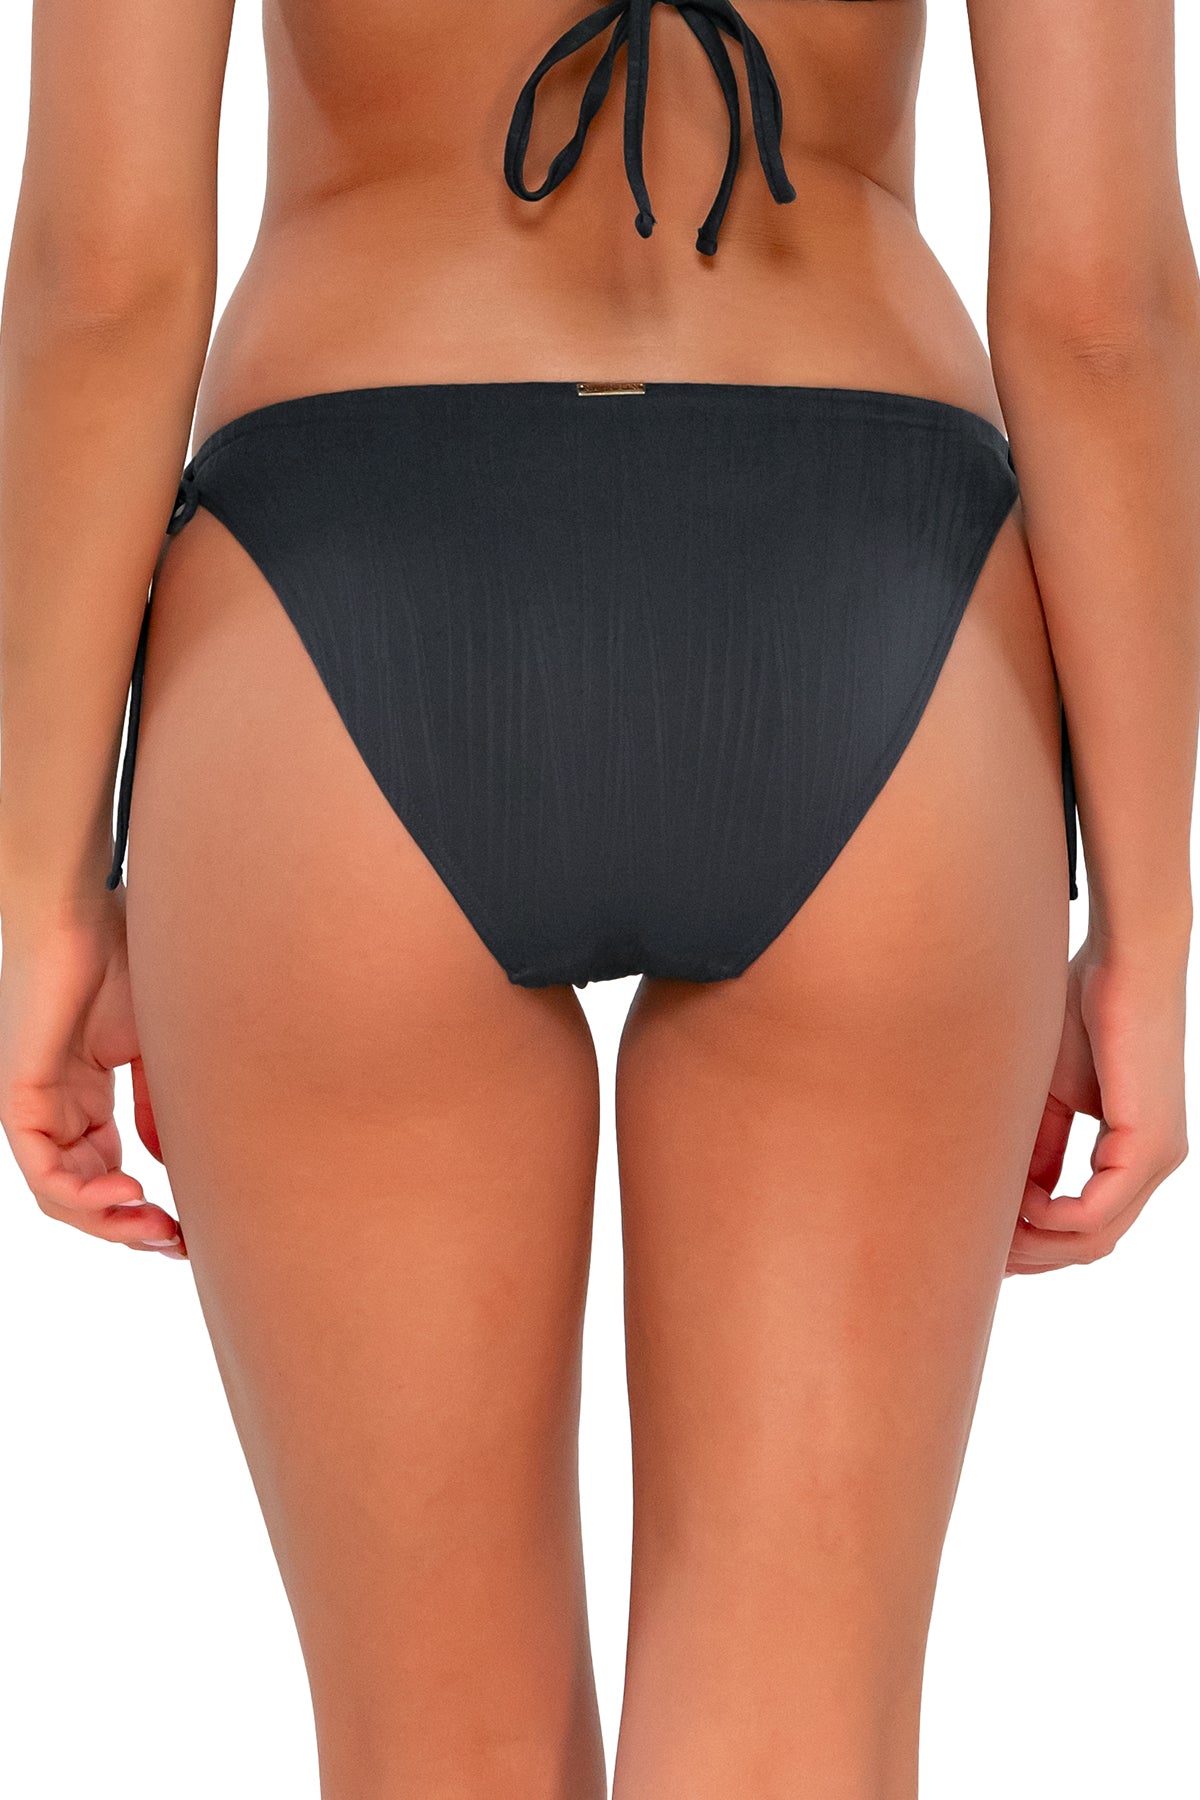 Back pose #1 of Daria wearing Sunsets Slate Seagrass Texture Everlee Tie Side Bottom